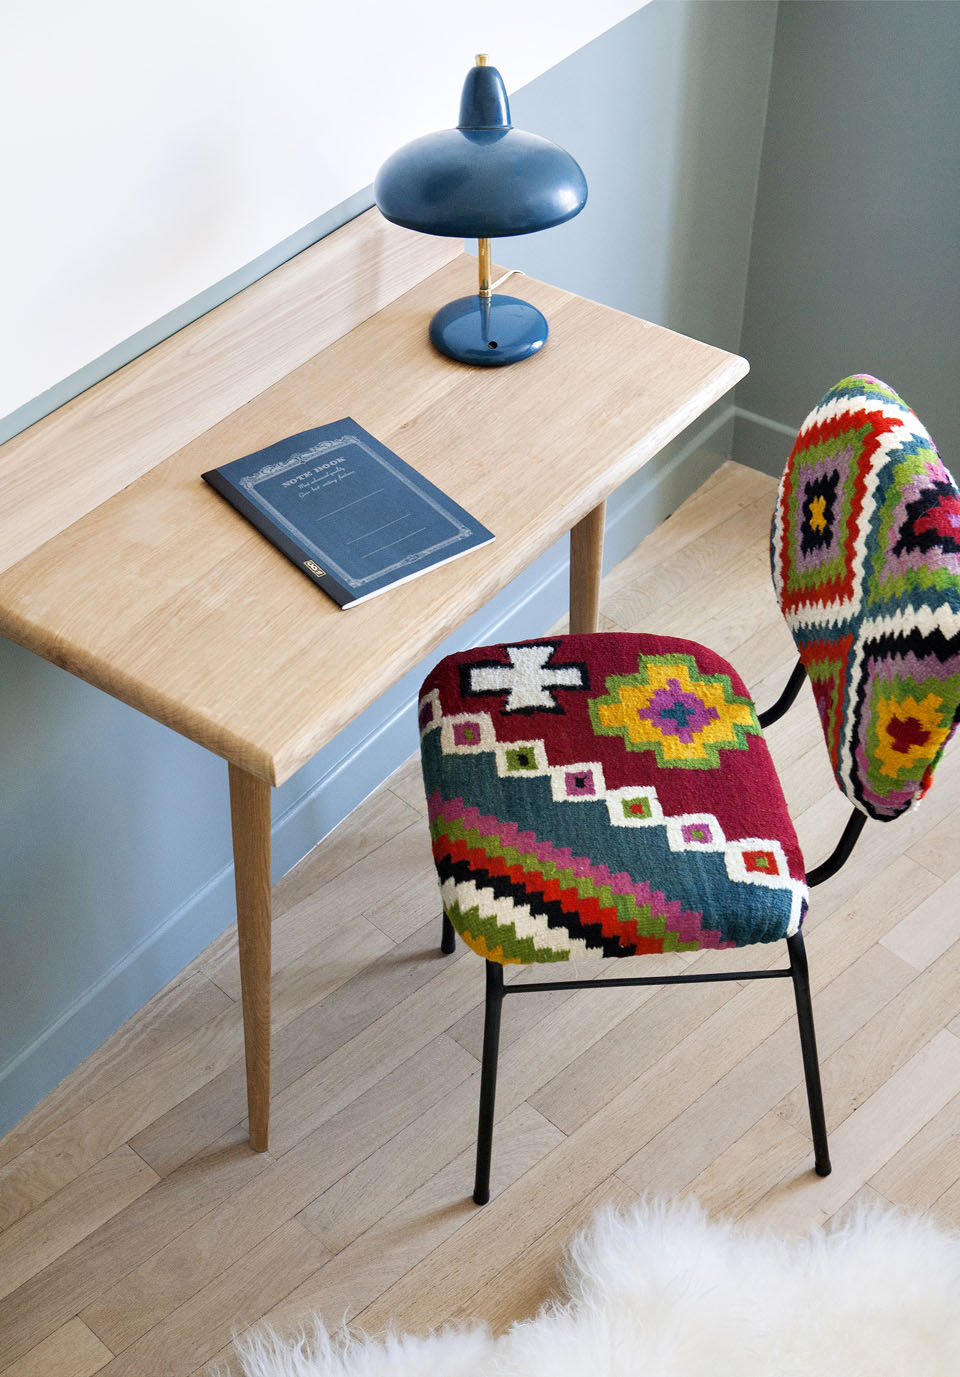 Wooden Small Work Table with Colorfull Chair Design